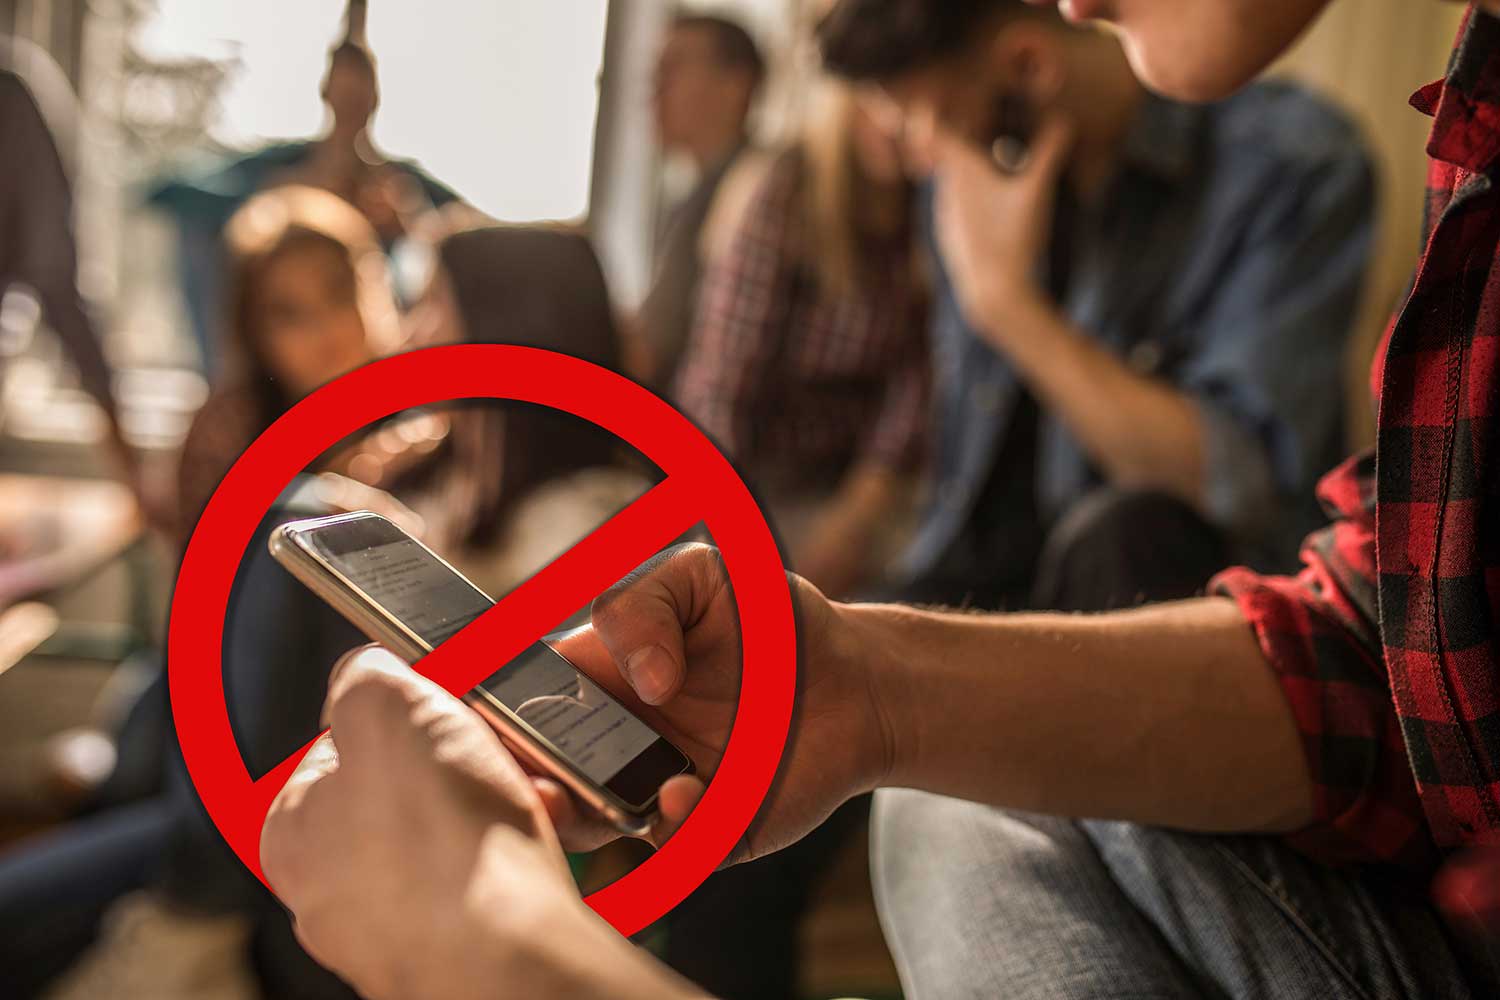 Teen’s hands holding a cell phone with a “no” symbol over it and other teens in background.